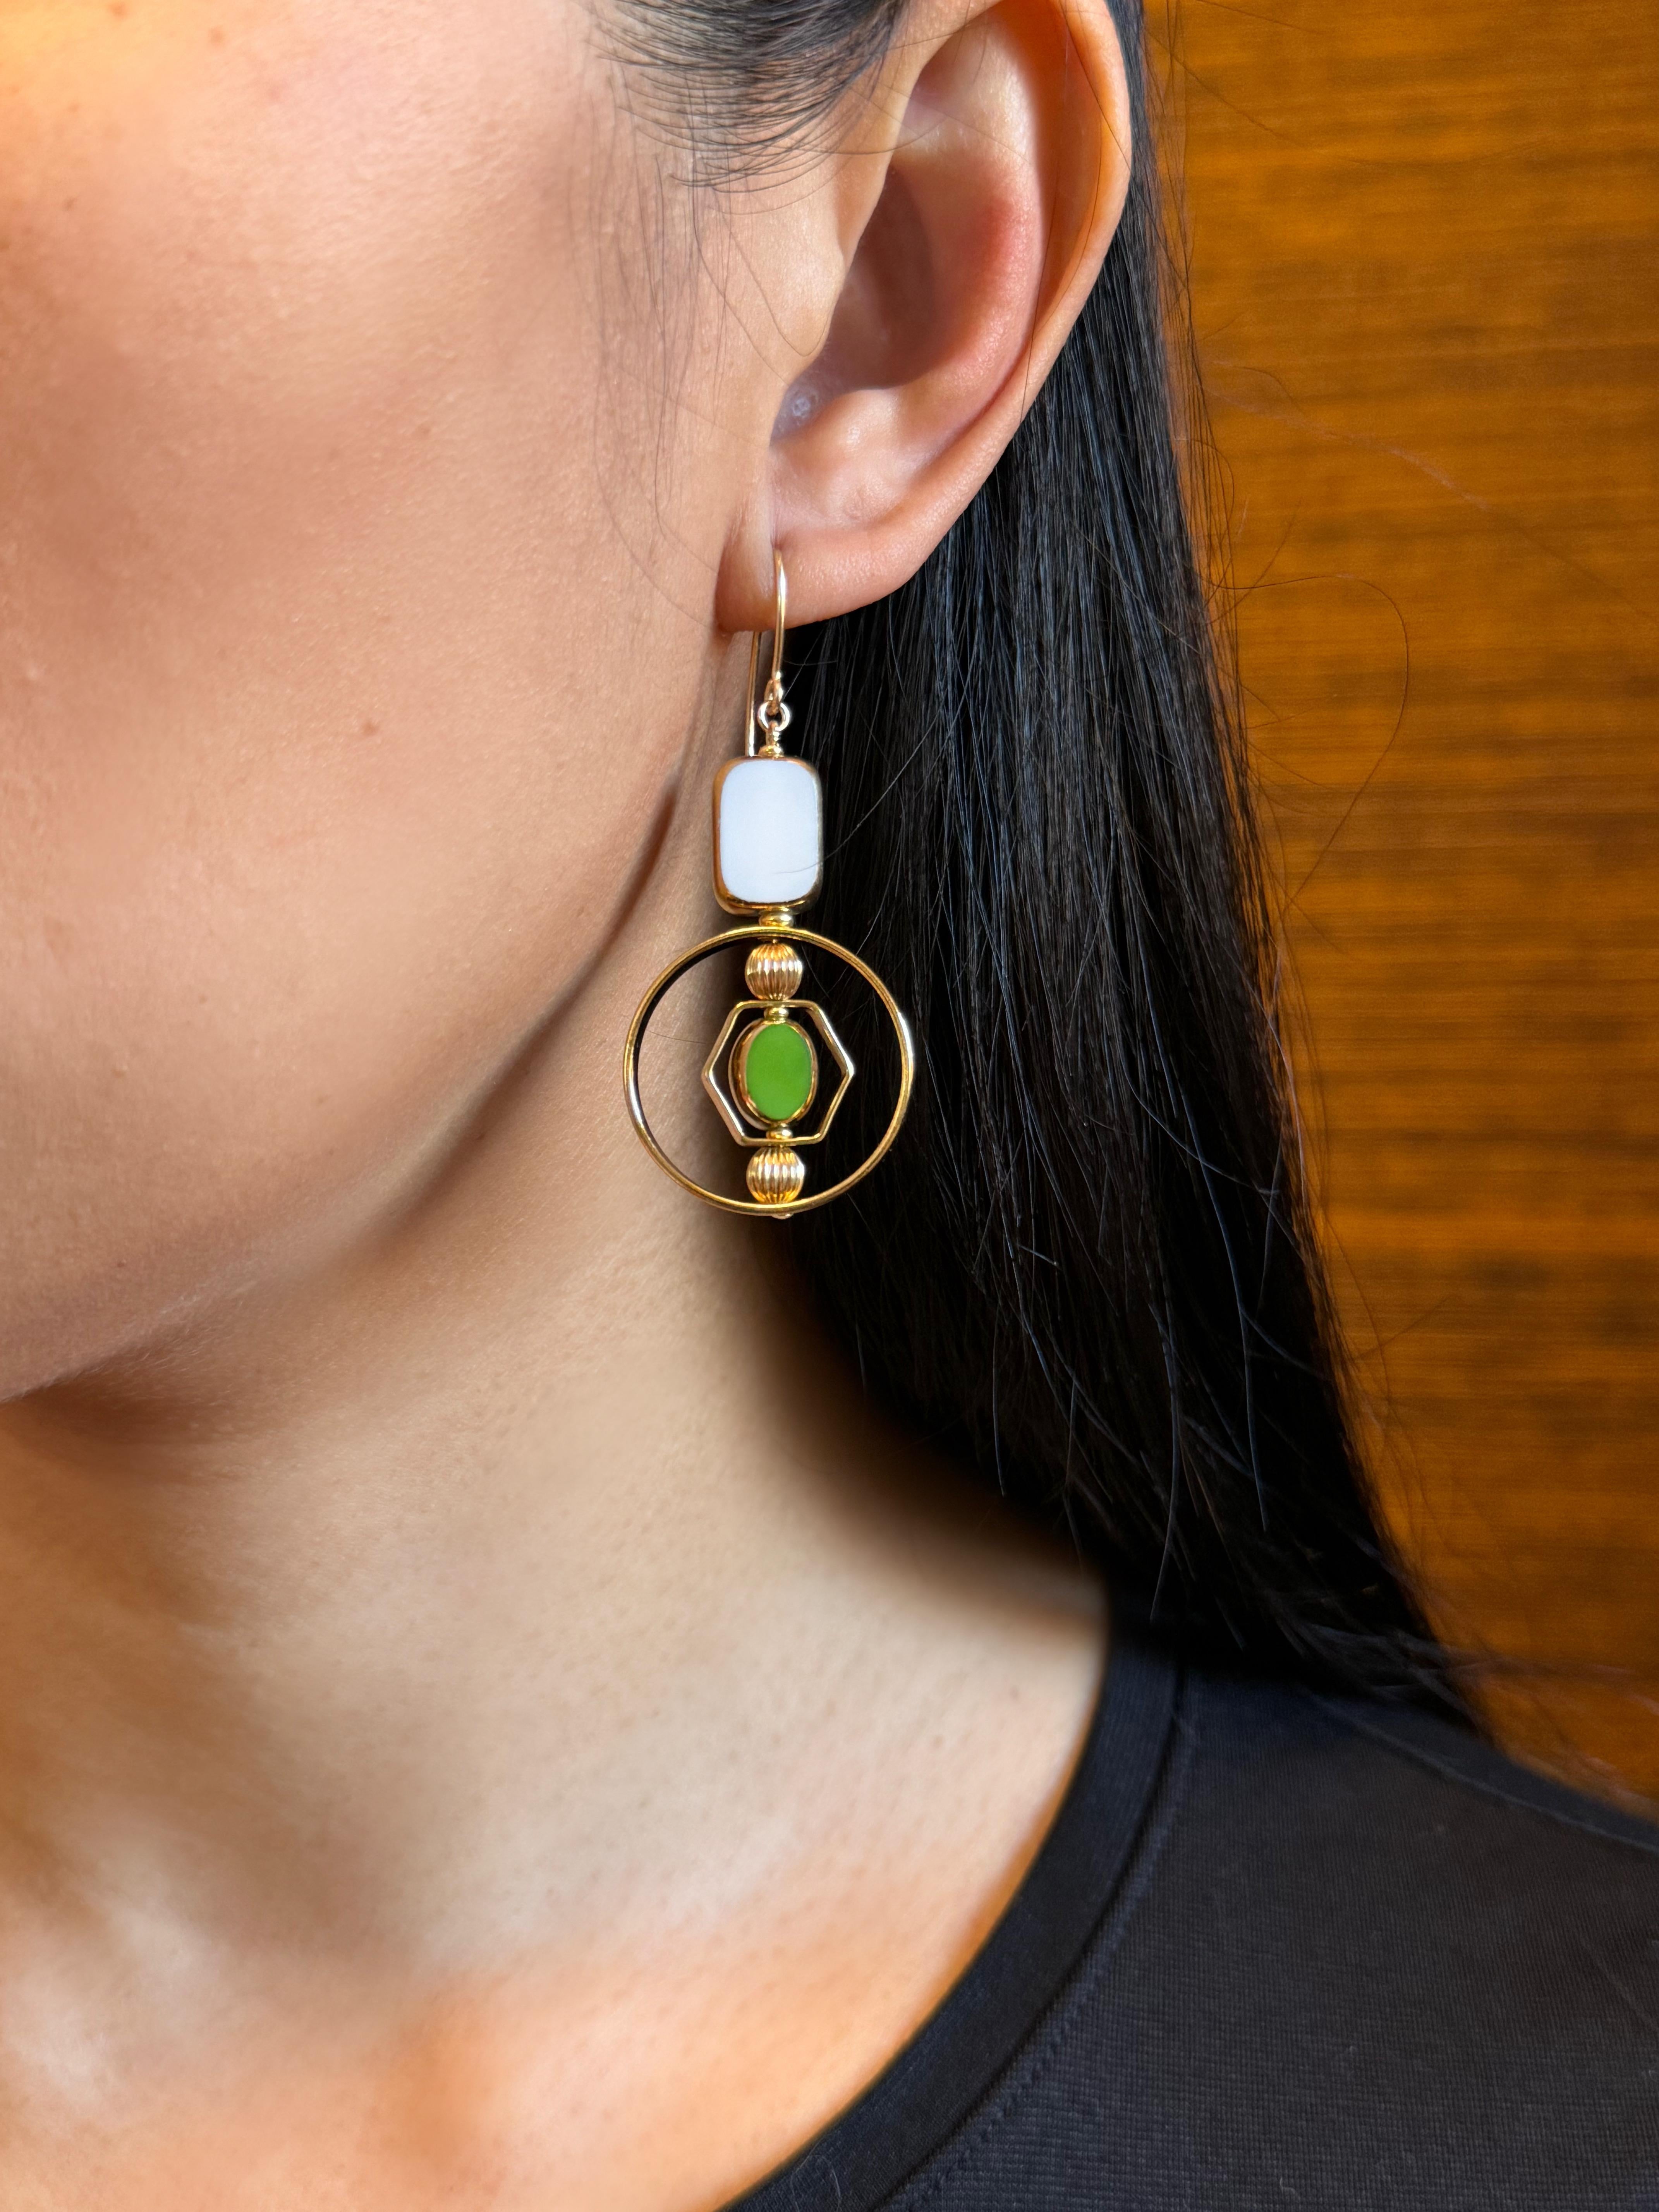 The earrings are light weight and are made to rotate and reposition with movement.

The earrings consist of white tile shape and small green oval-shaped beads. They are new old stock vintage German glass beads that are framed with 24K gold. The